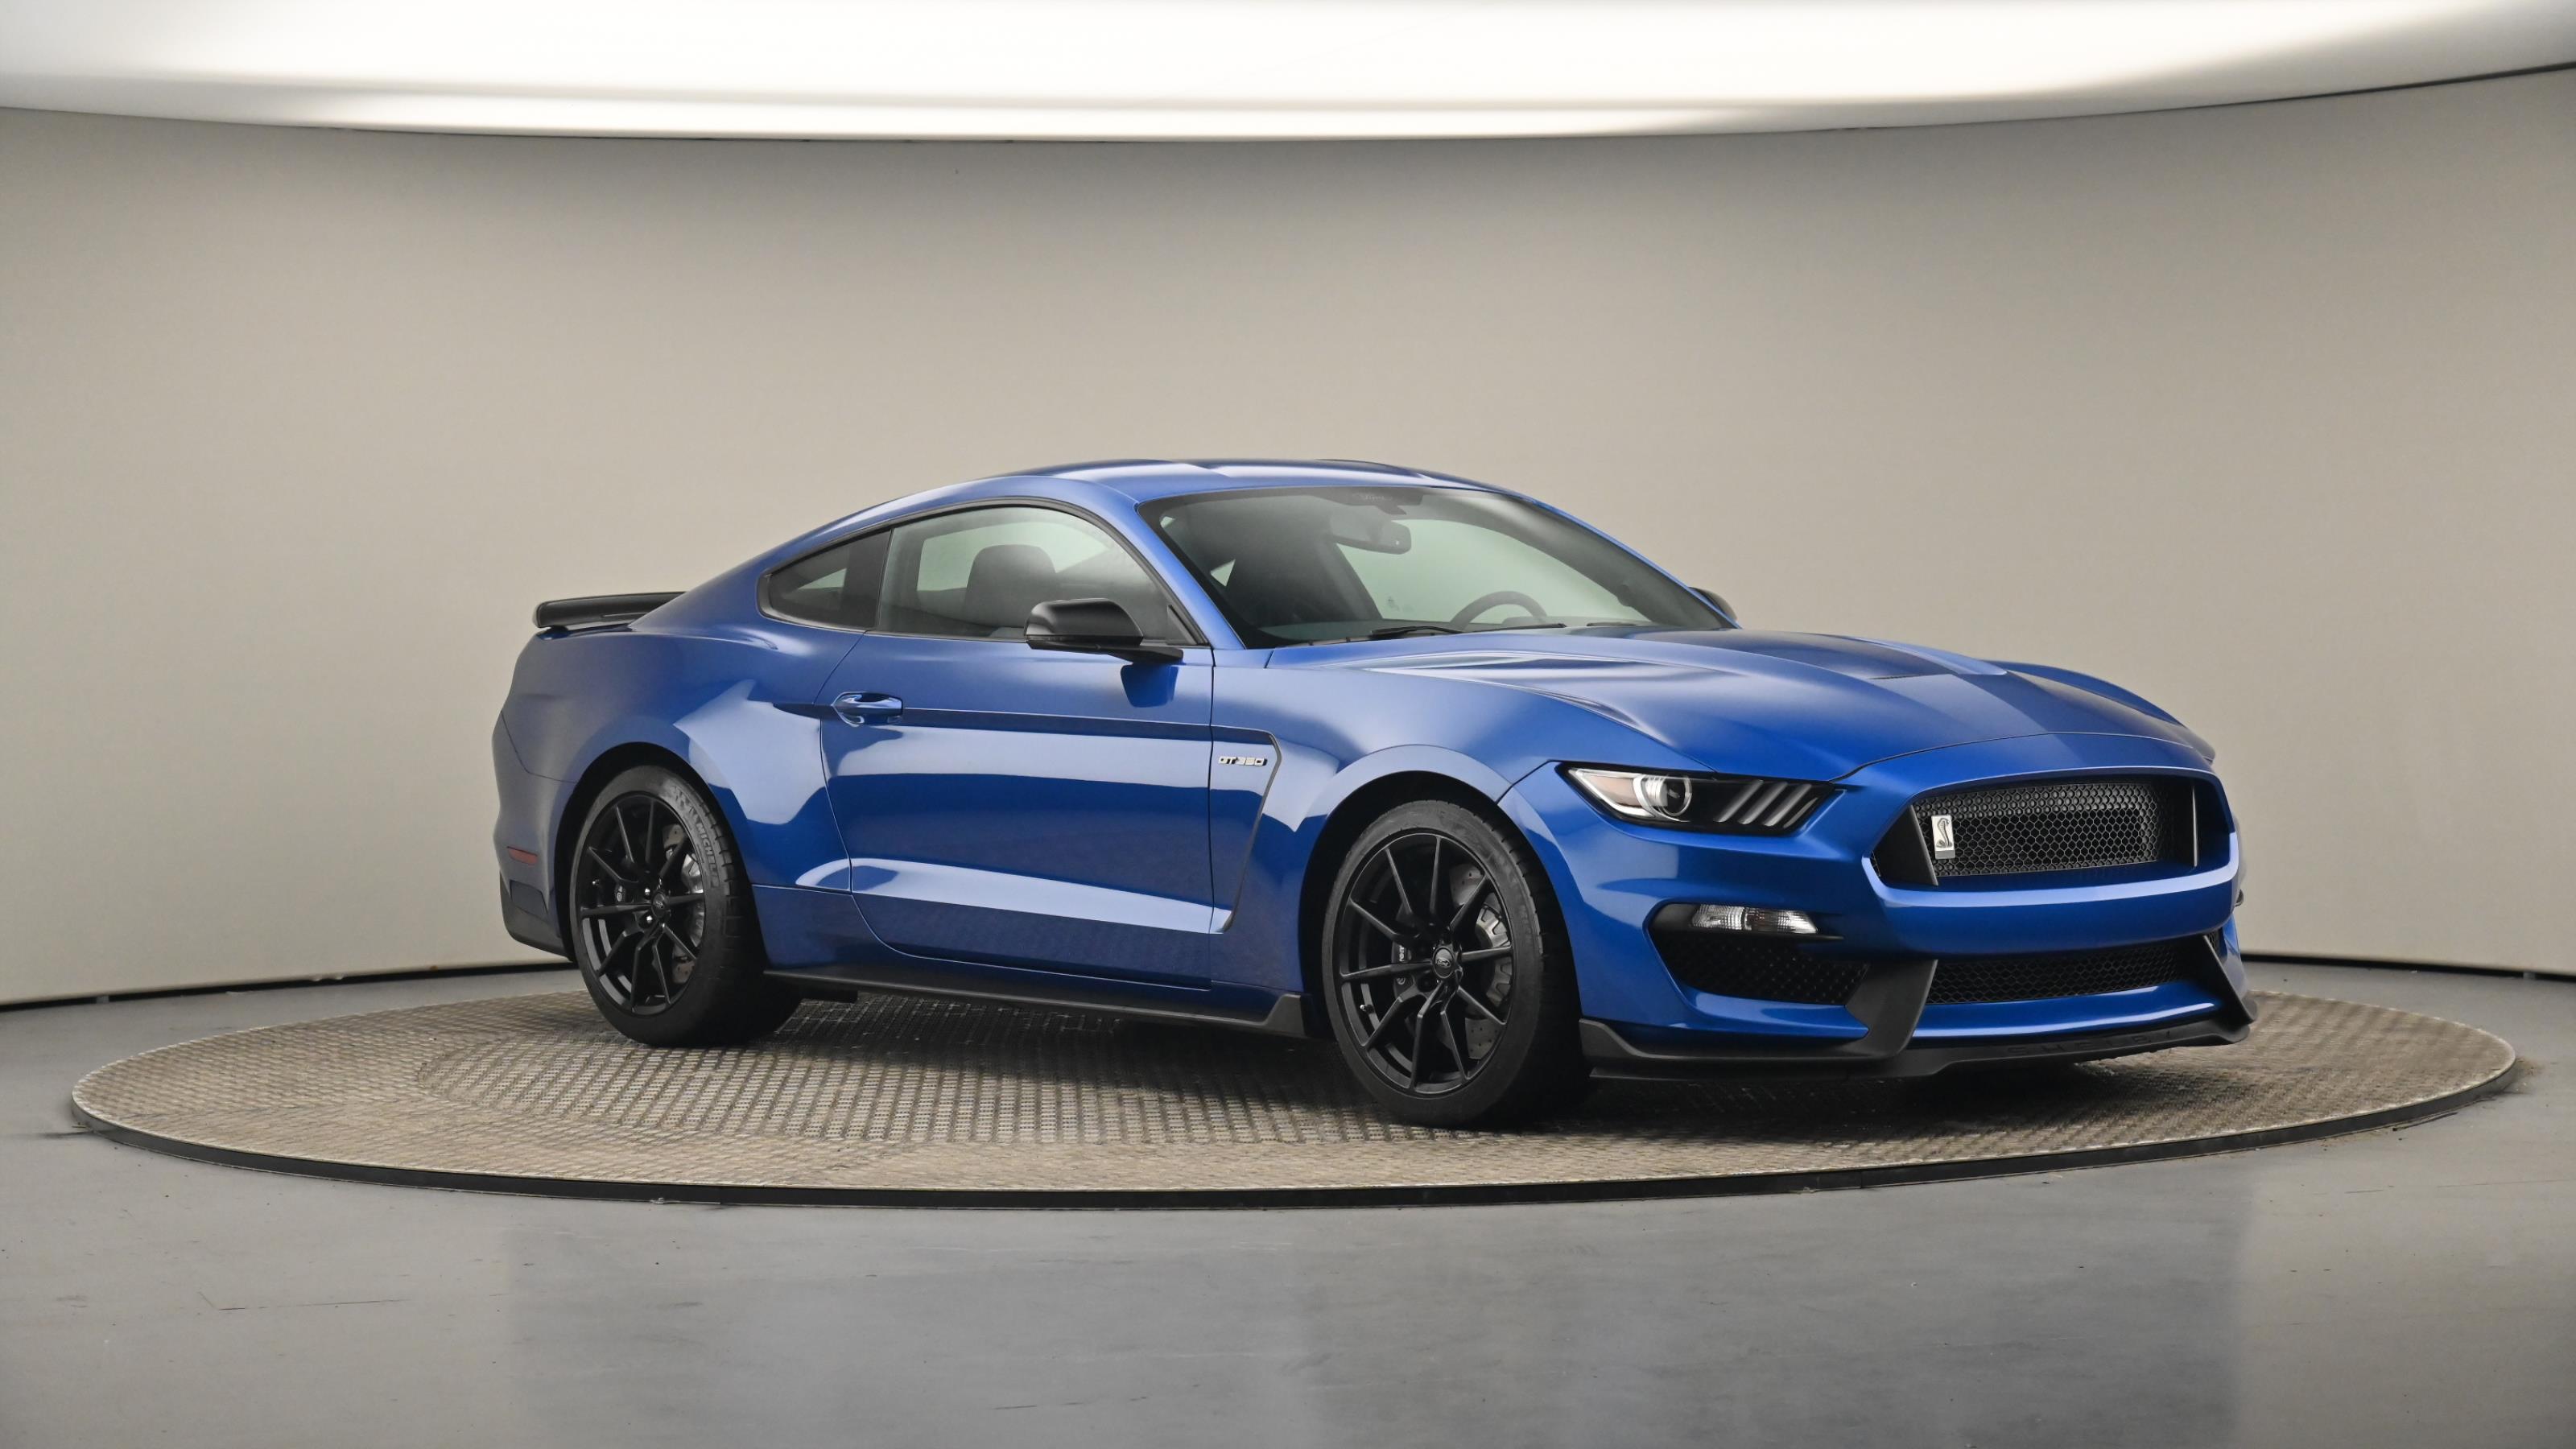 Used 2018 Ford MUSTANG Shelby GT350 £60,000 5,860 miles | Saxton4x4